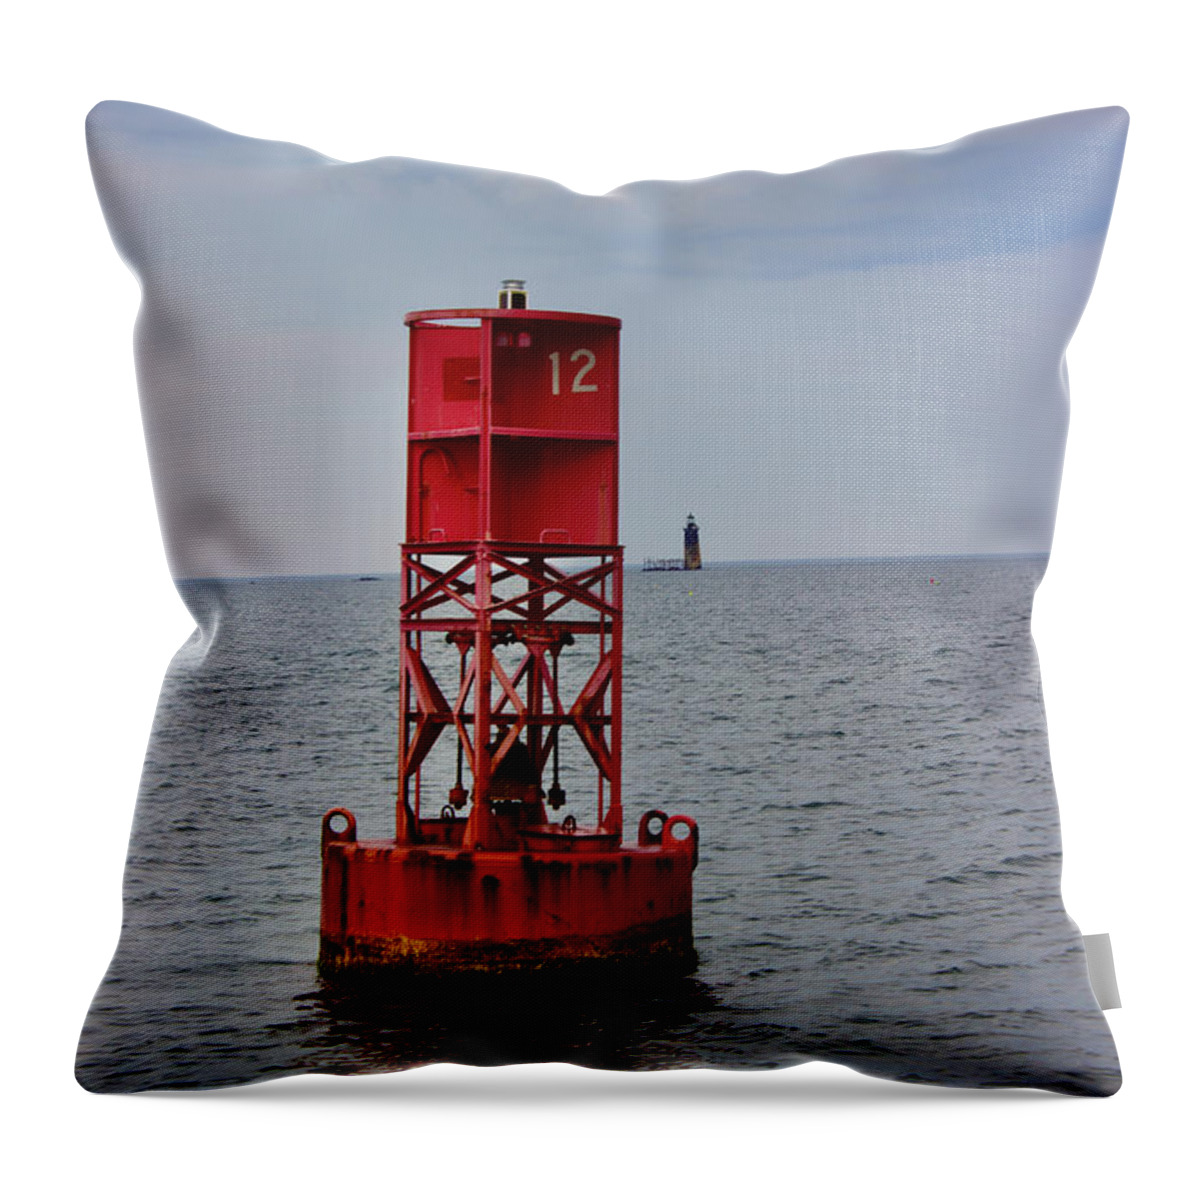  Throw Pillow featuring the pyrography Portland harbor by Annamaria Frost